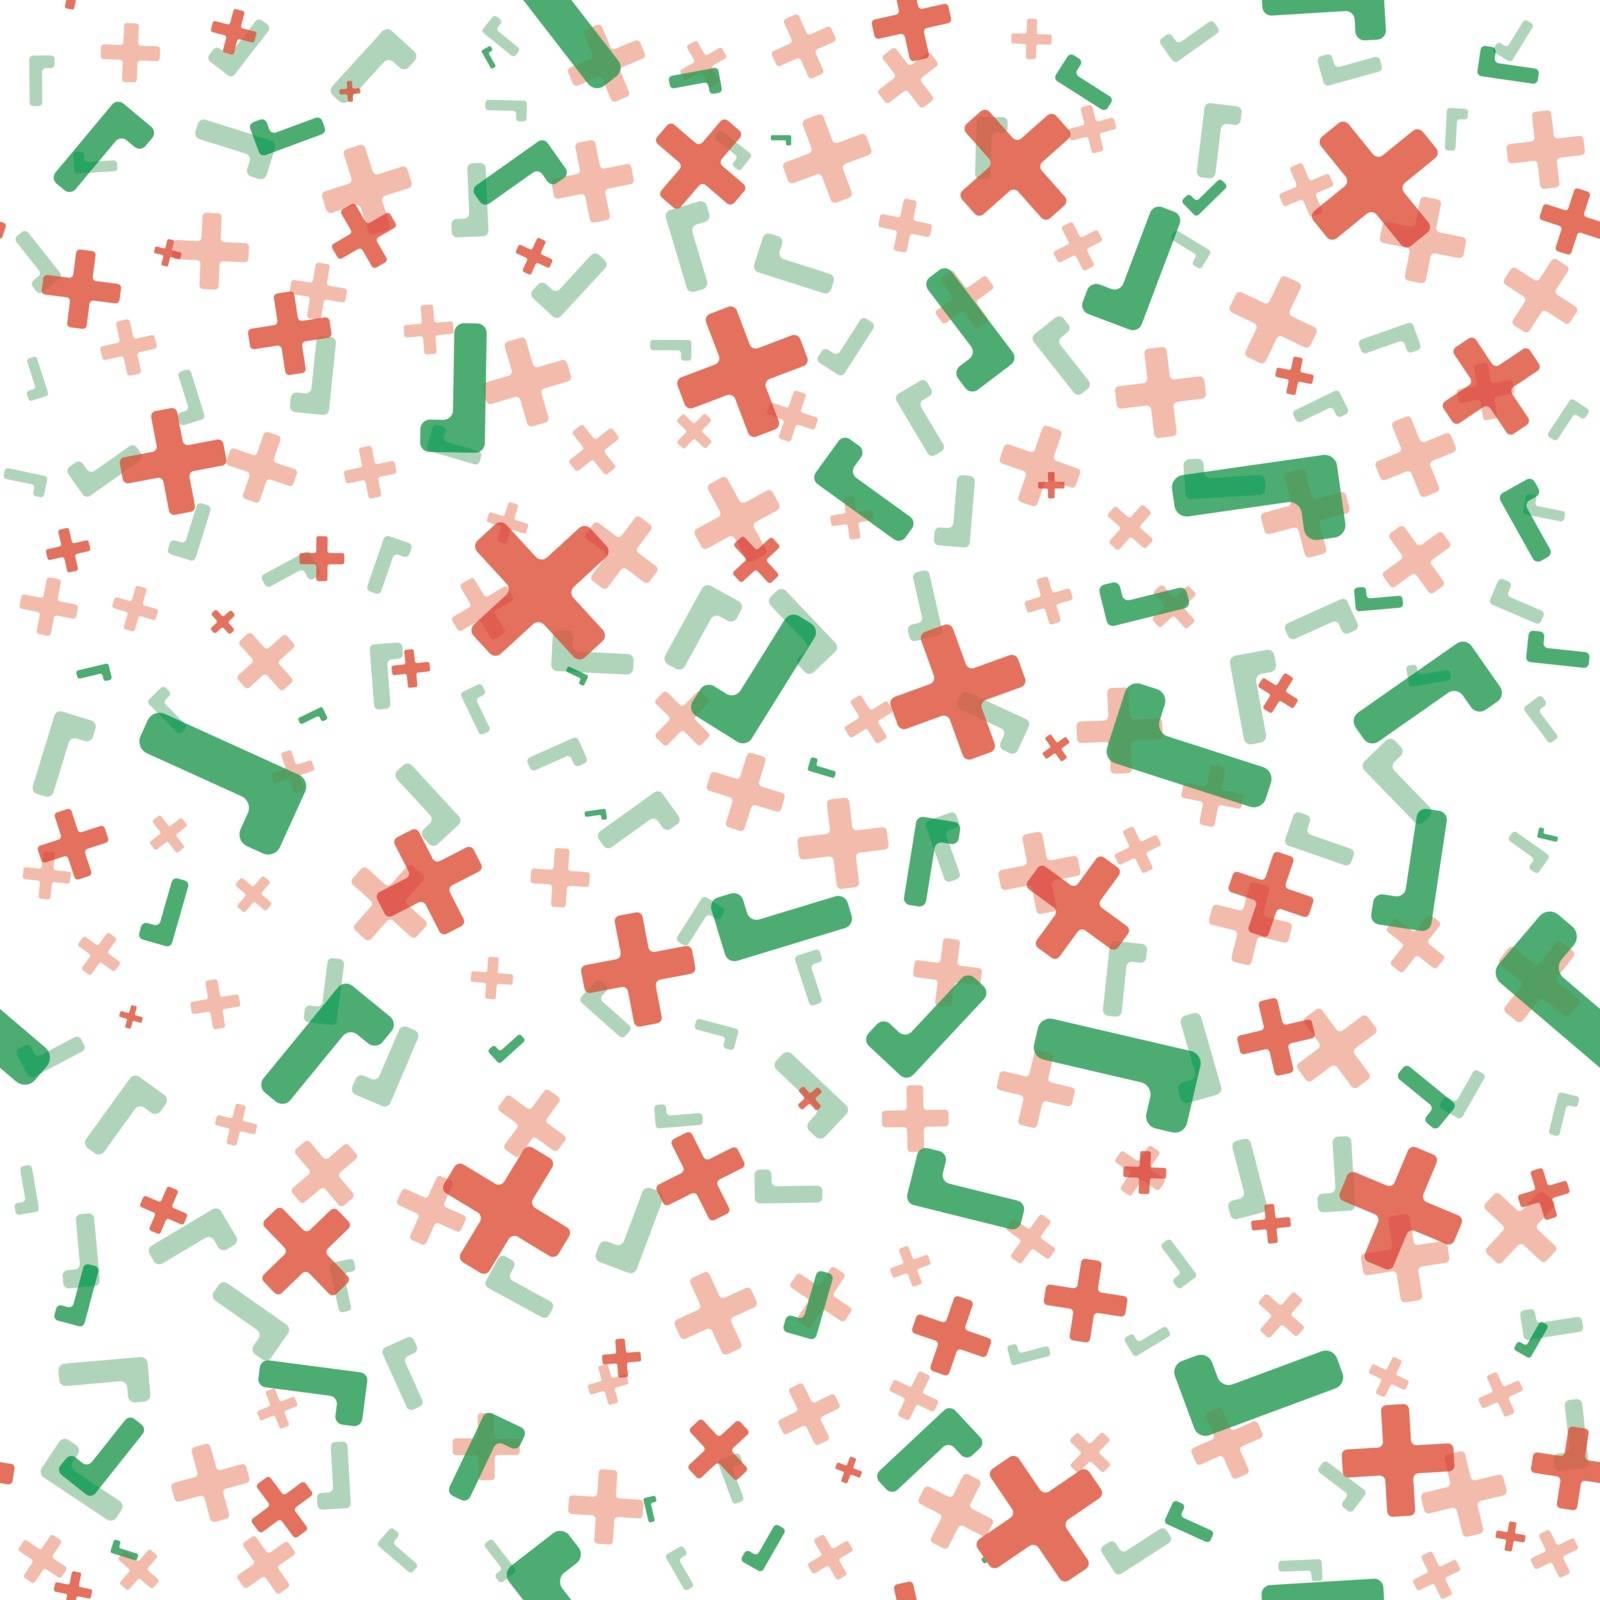 Red tick and green cross symbols on white background. Seamless pattern.